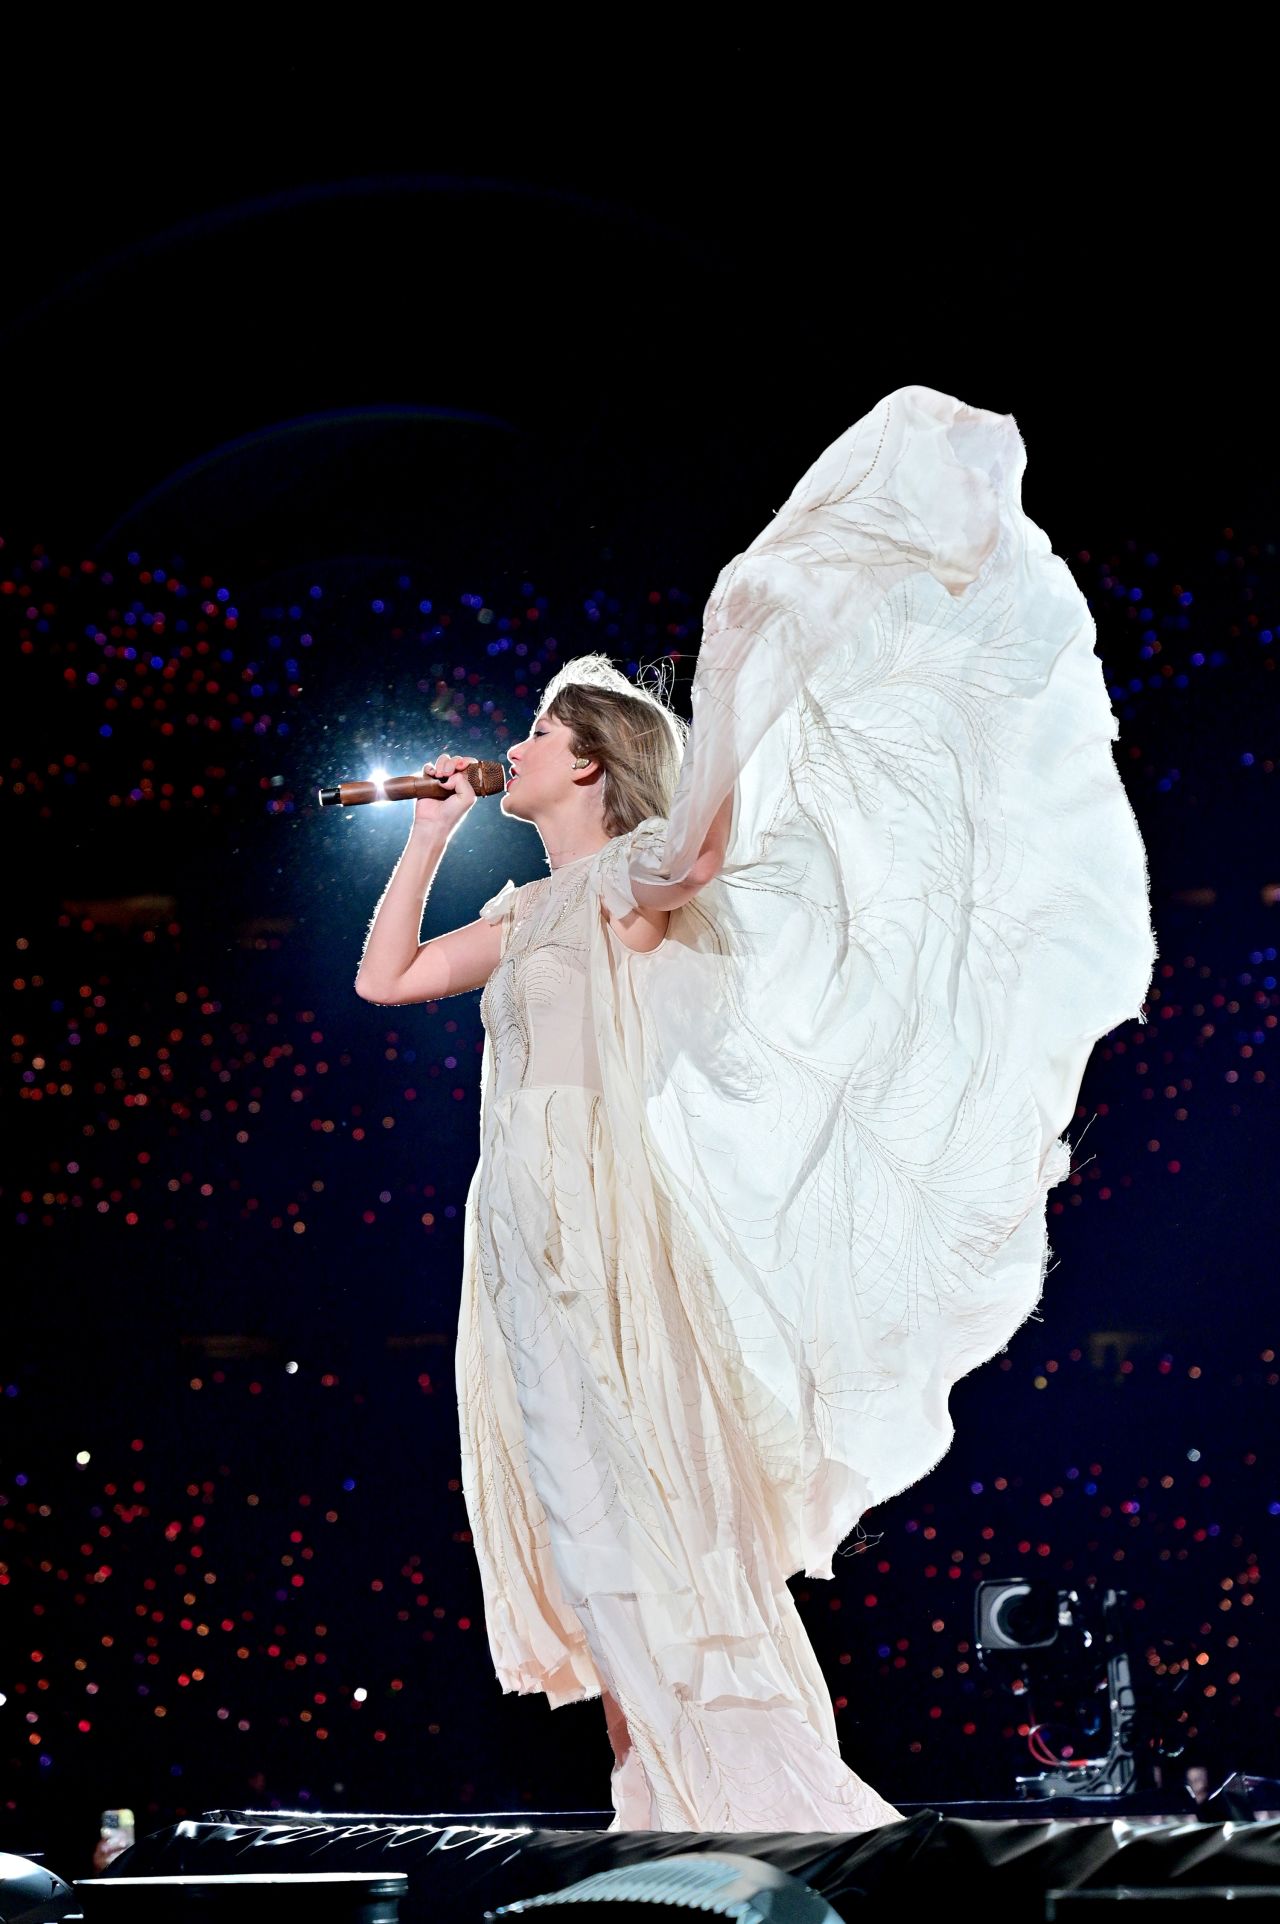 Singer <a href="http://www.cnn.com/2022/10/21/entertainment/gallery/taylor-swift/index.html" target="_blank">Taylor Swift</a> performs during a concert in Philadelphia on Friday, May 12.